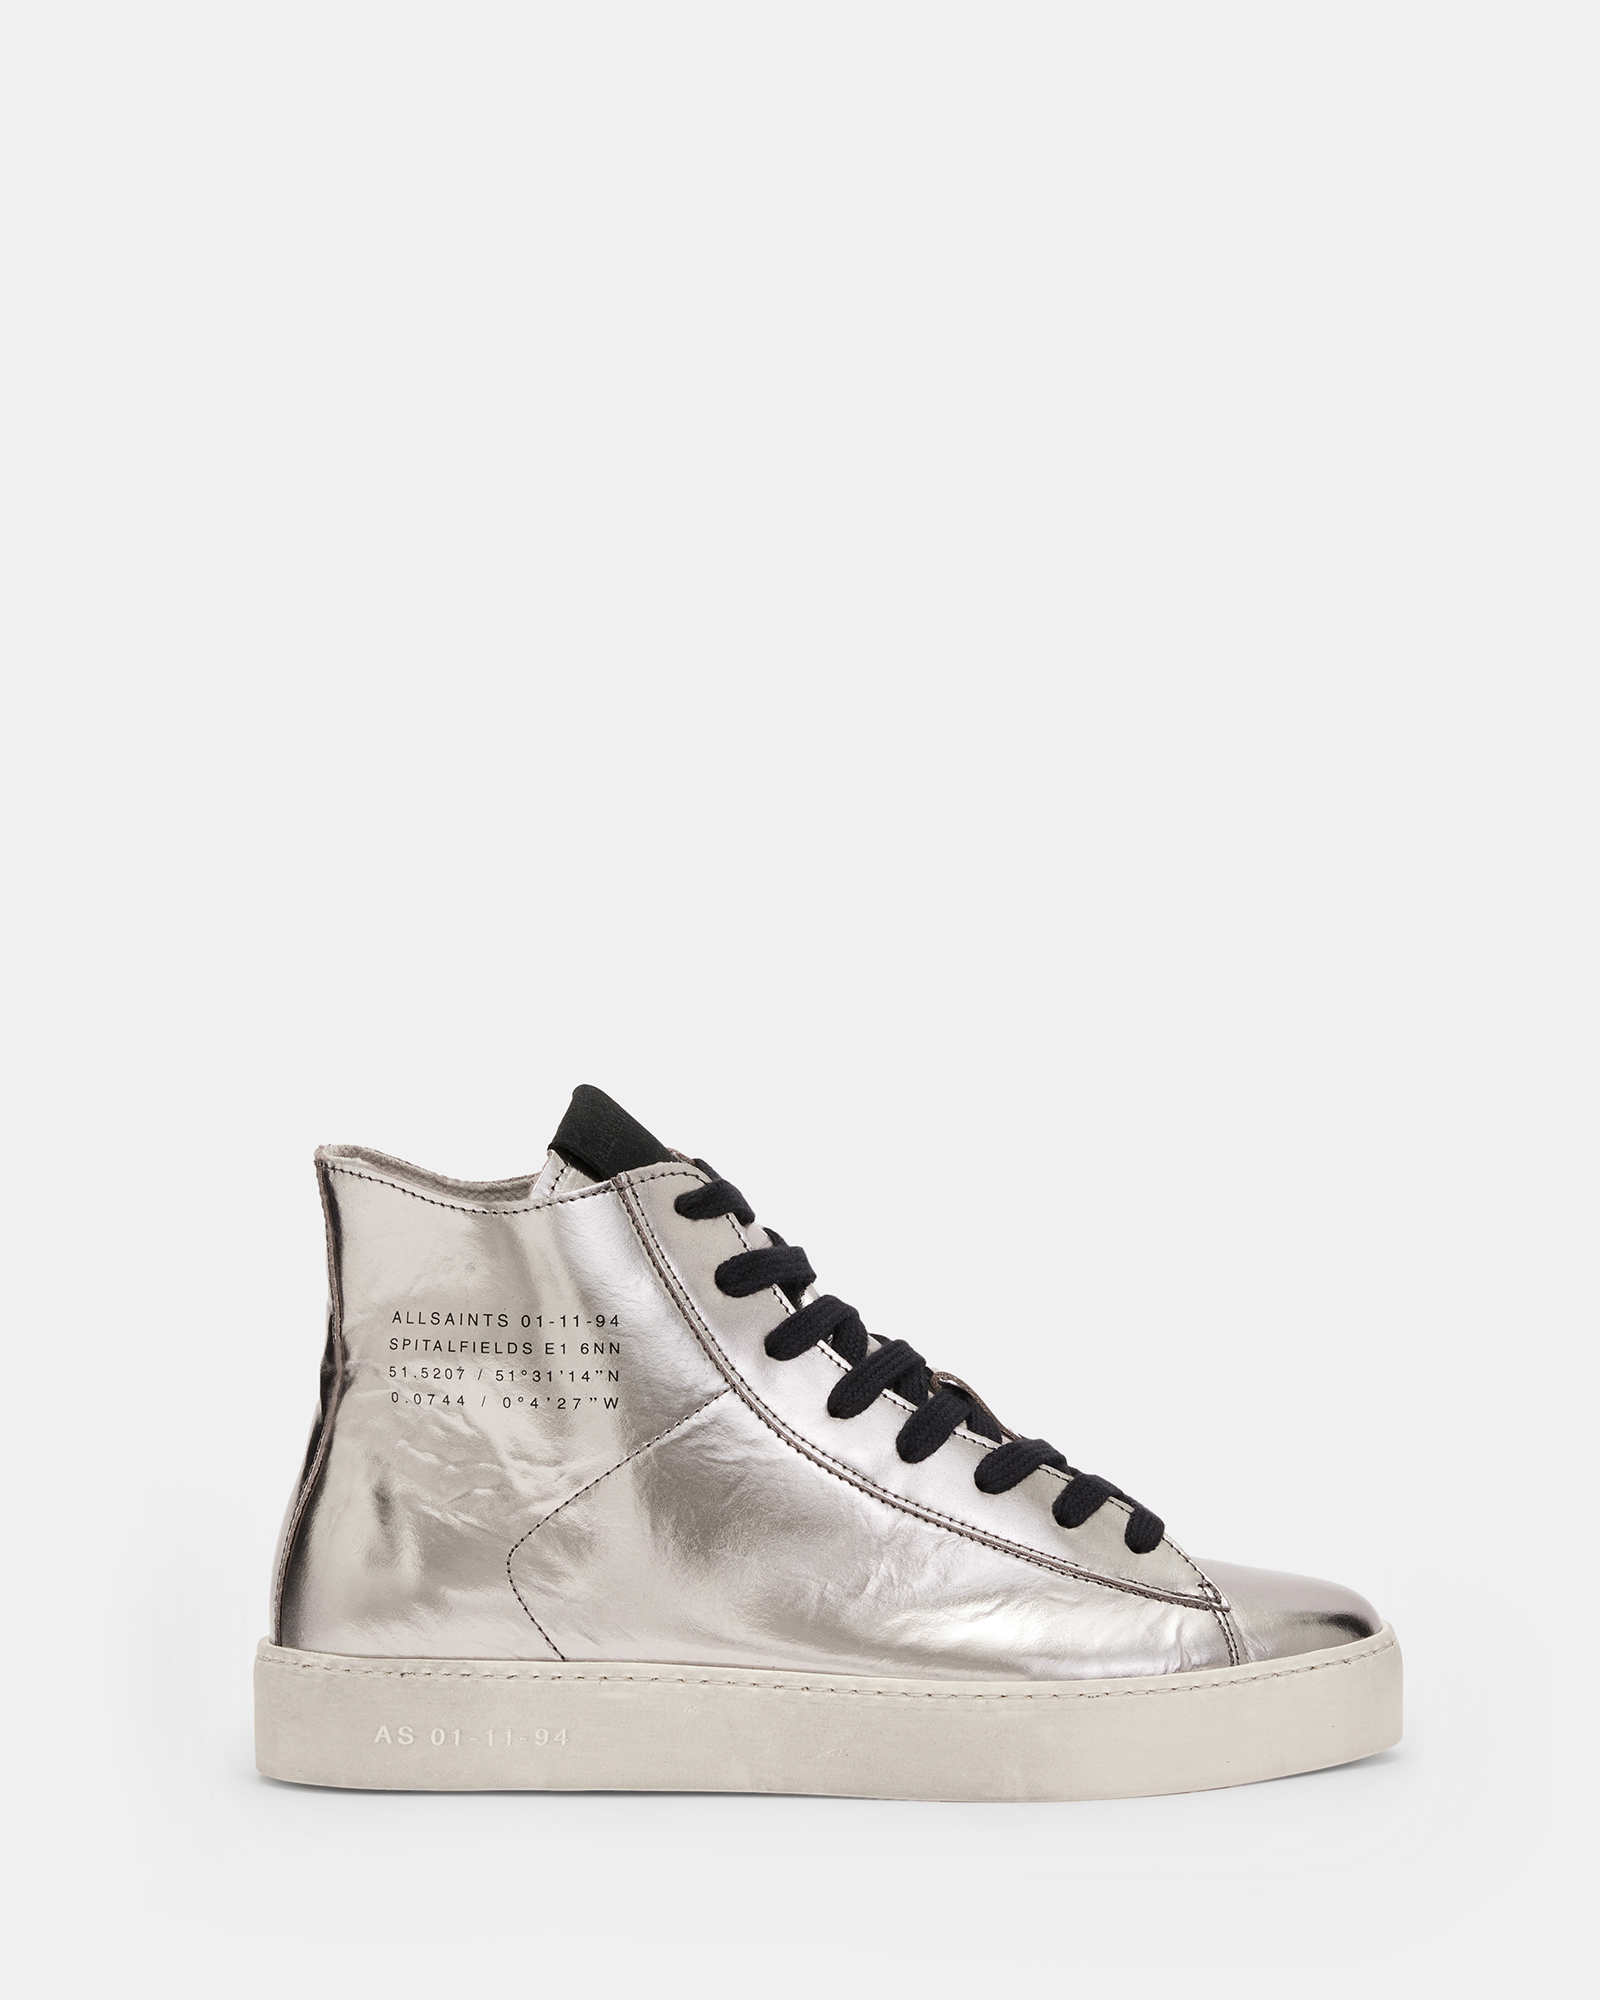 Tana Metallic Leather High Top Trainers Silver | ALLSAINTS Canada